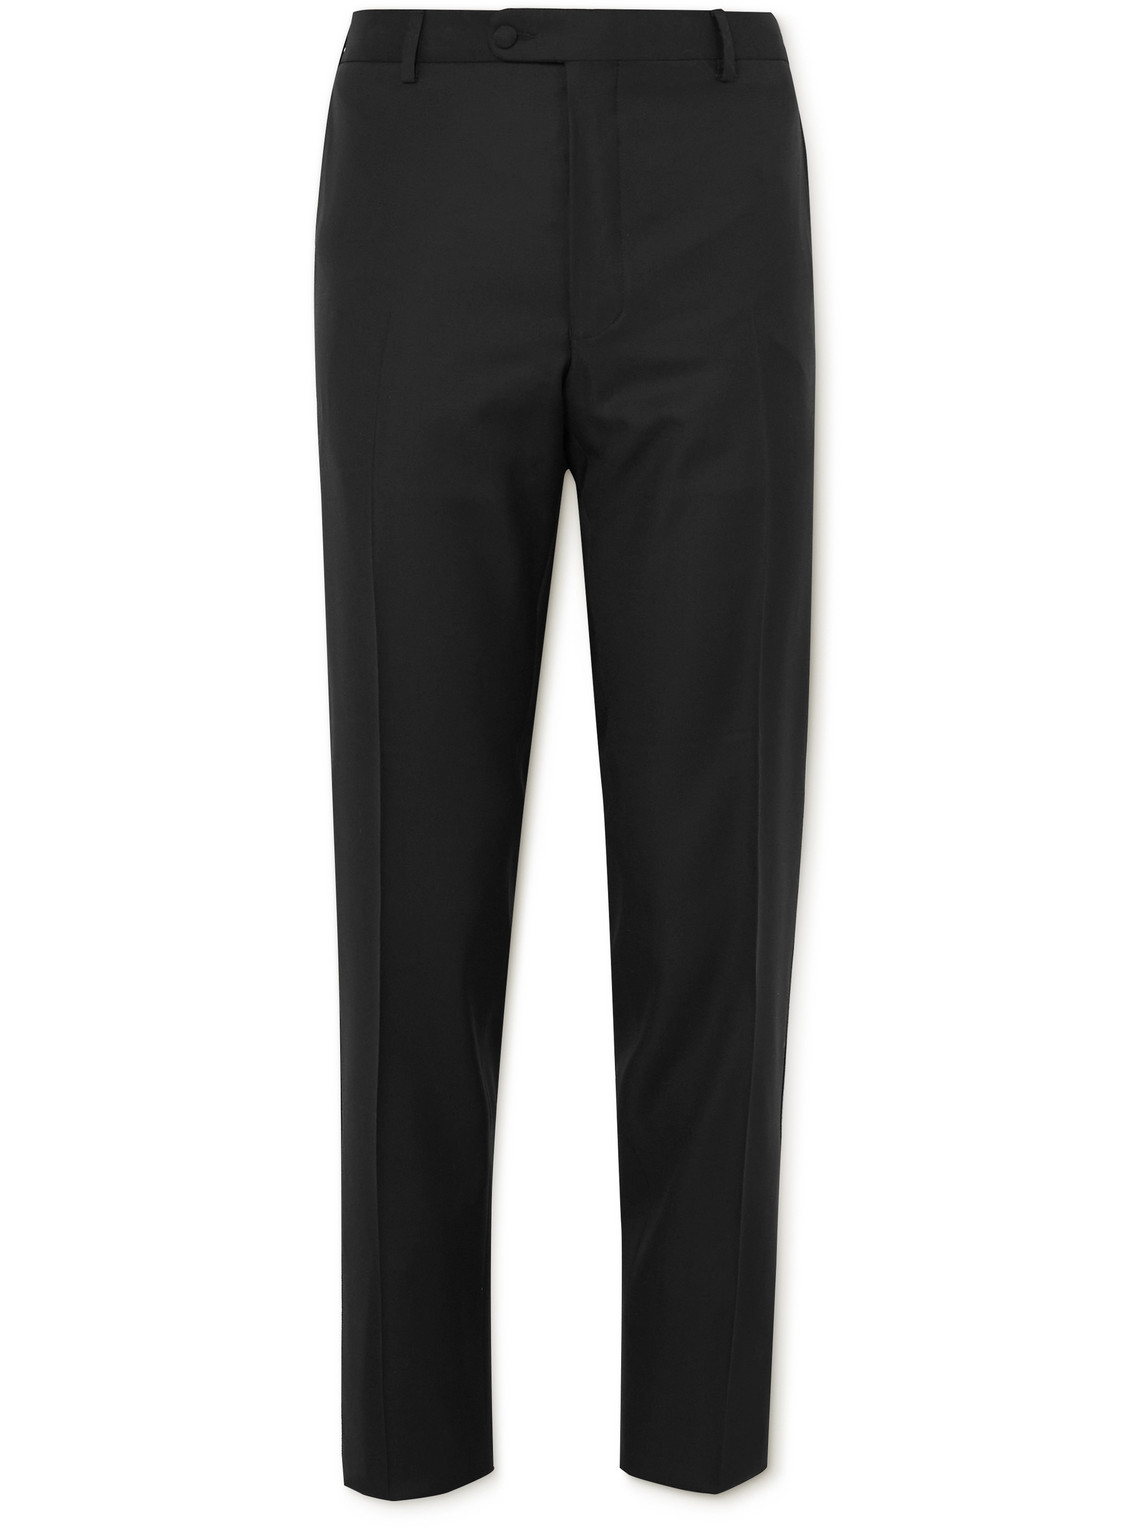 Mr P Slim-fit Tapered Wool Tuxedo Trousers In Black